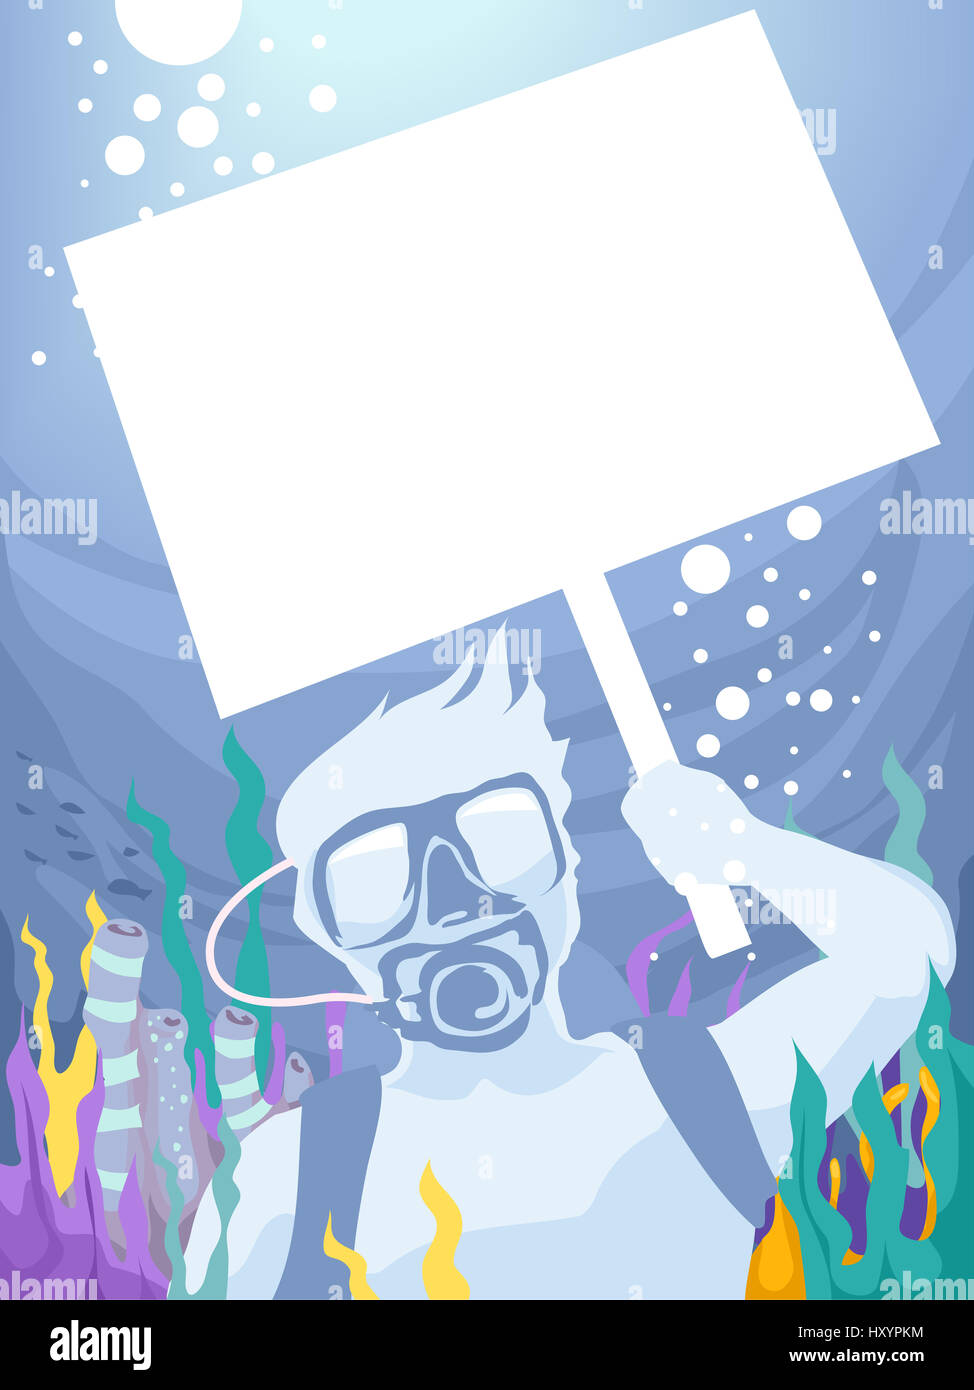 Illustration of a Man Holding a Picket Sign While Underwater Stock Photo